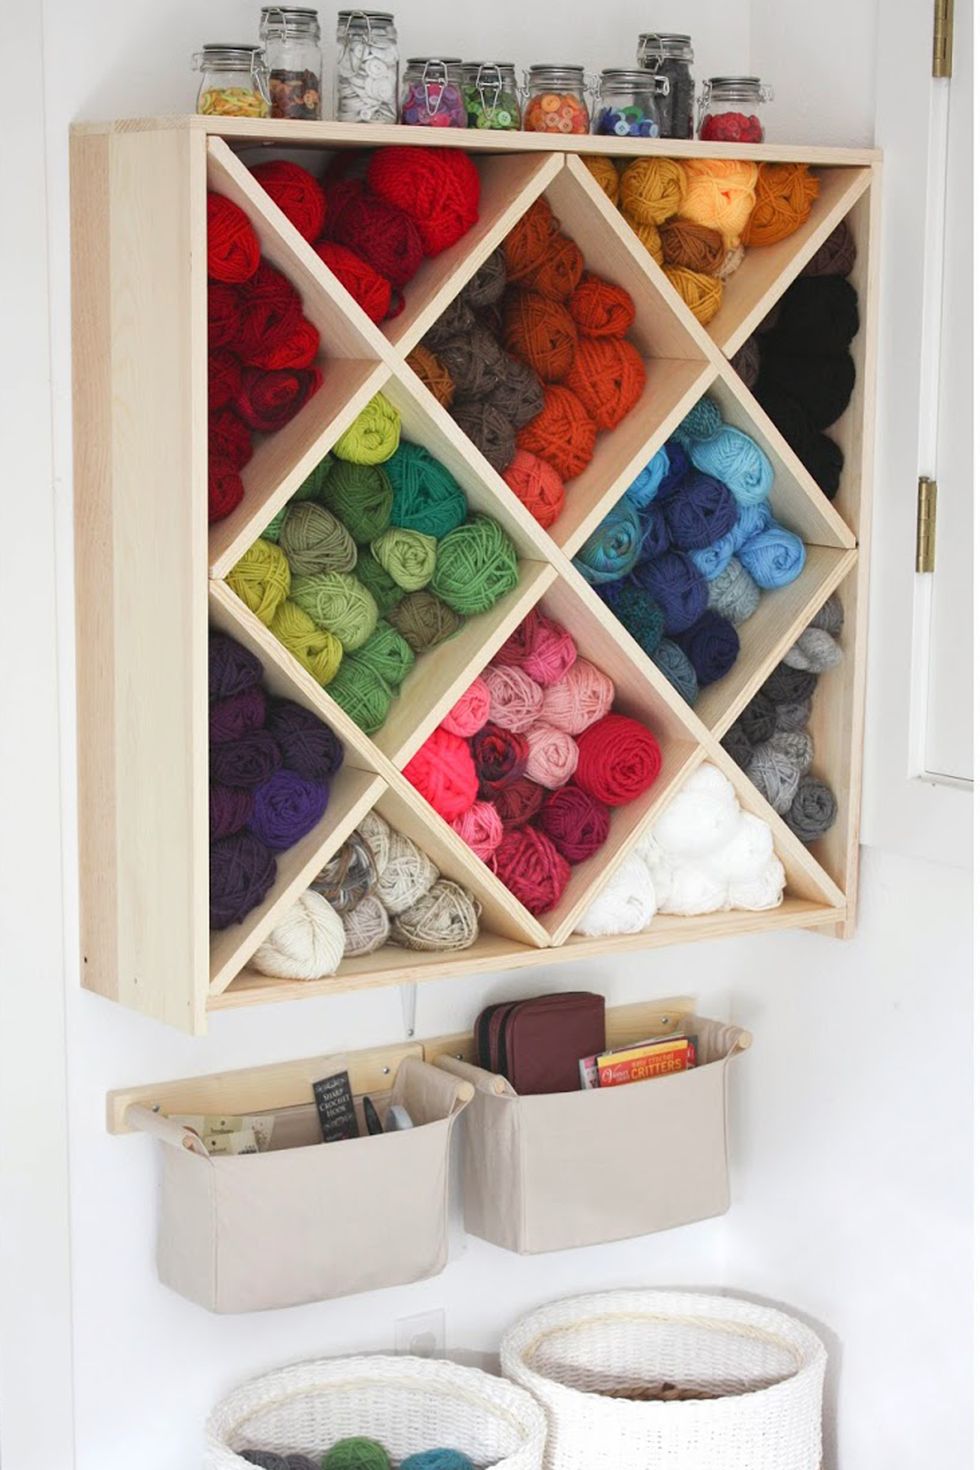 12 DIY Wall Organizers to Help Clean Up Your Space